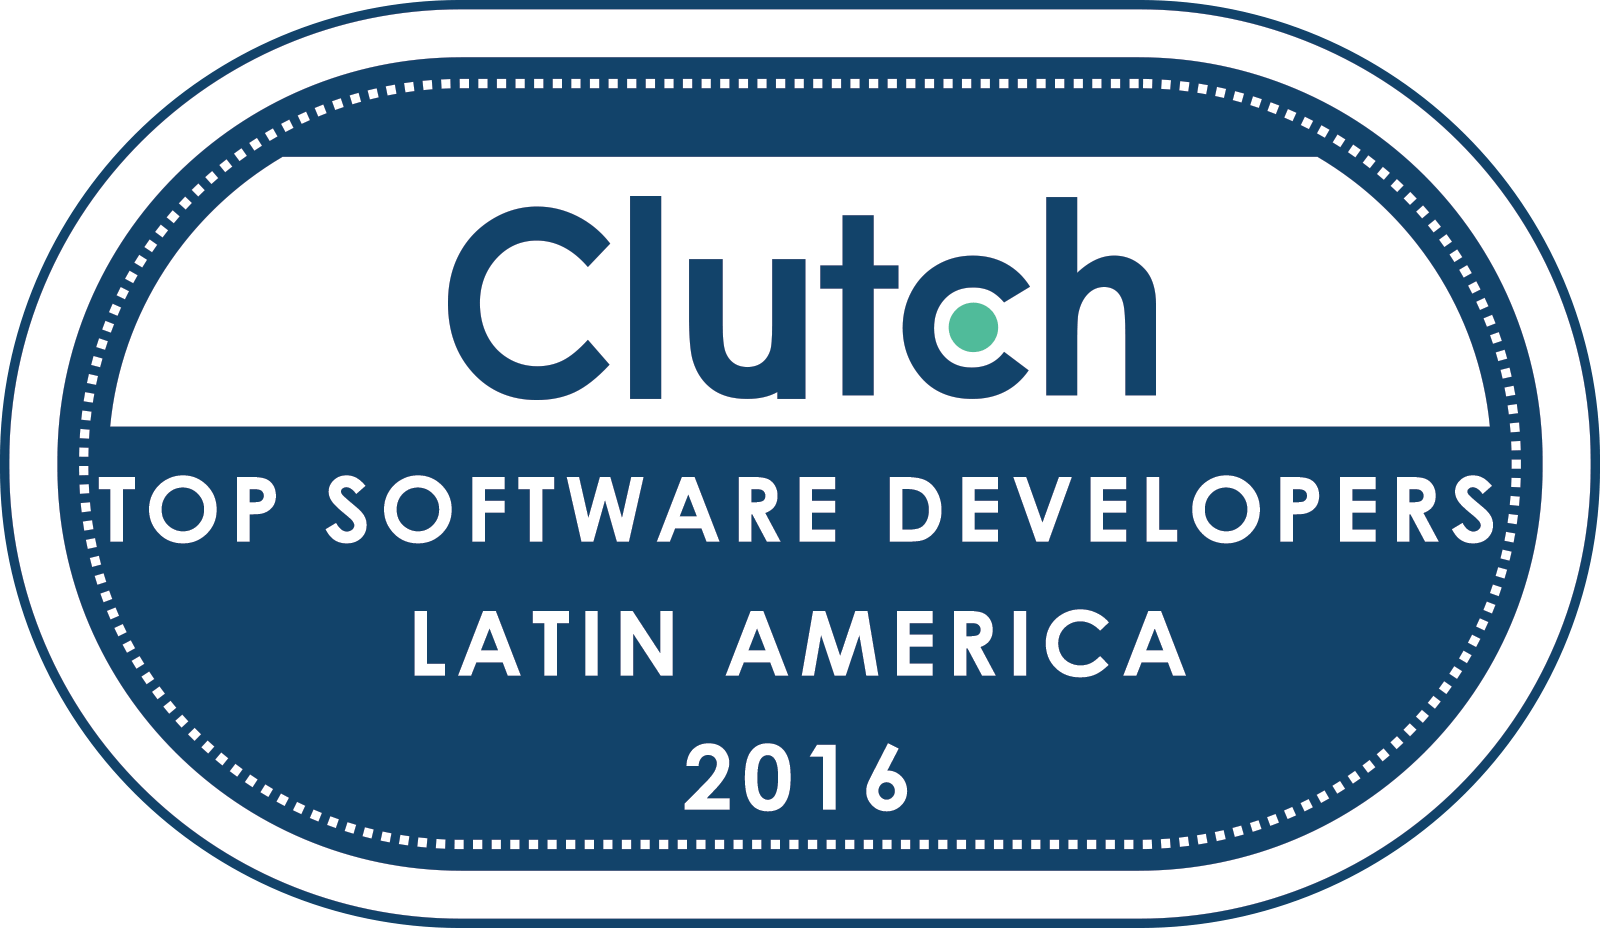 Perficient Latin America Ranked As A Top Developer For Latin America, .net And Java